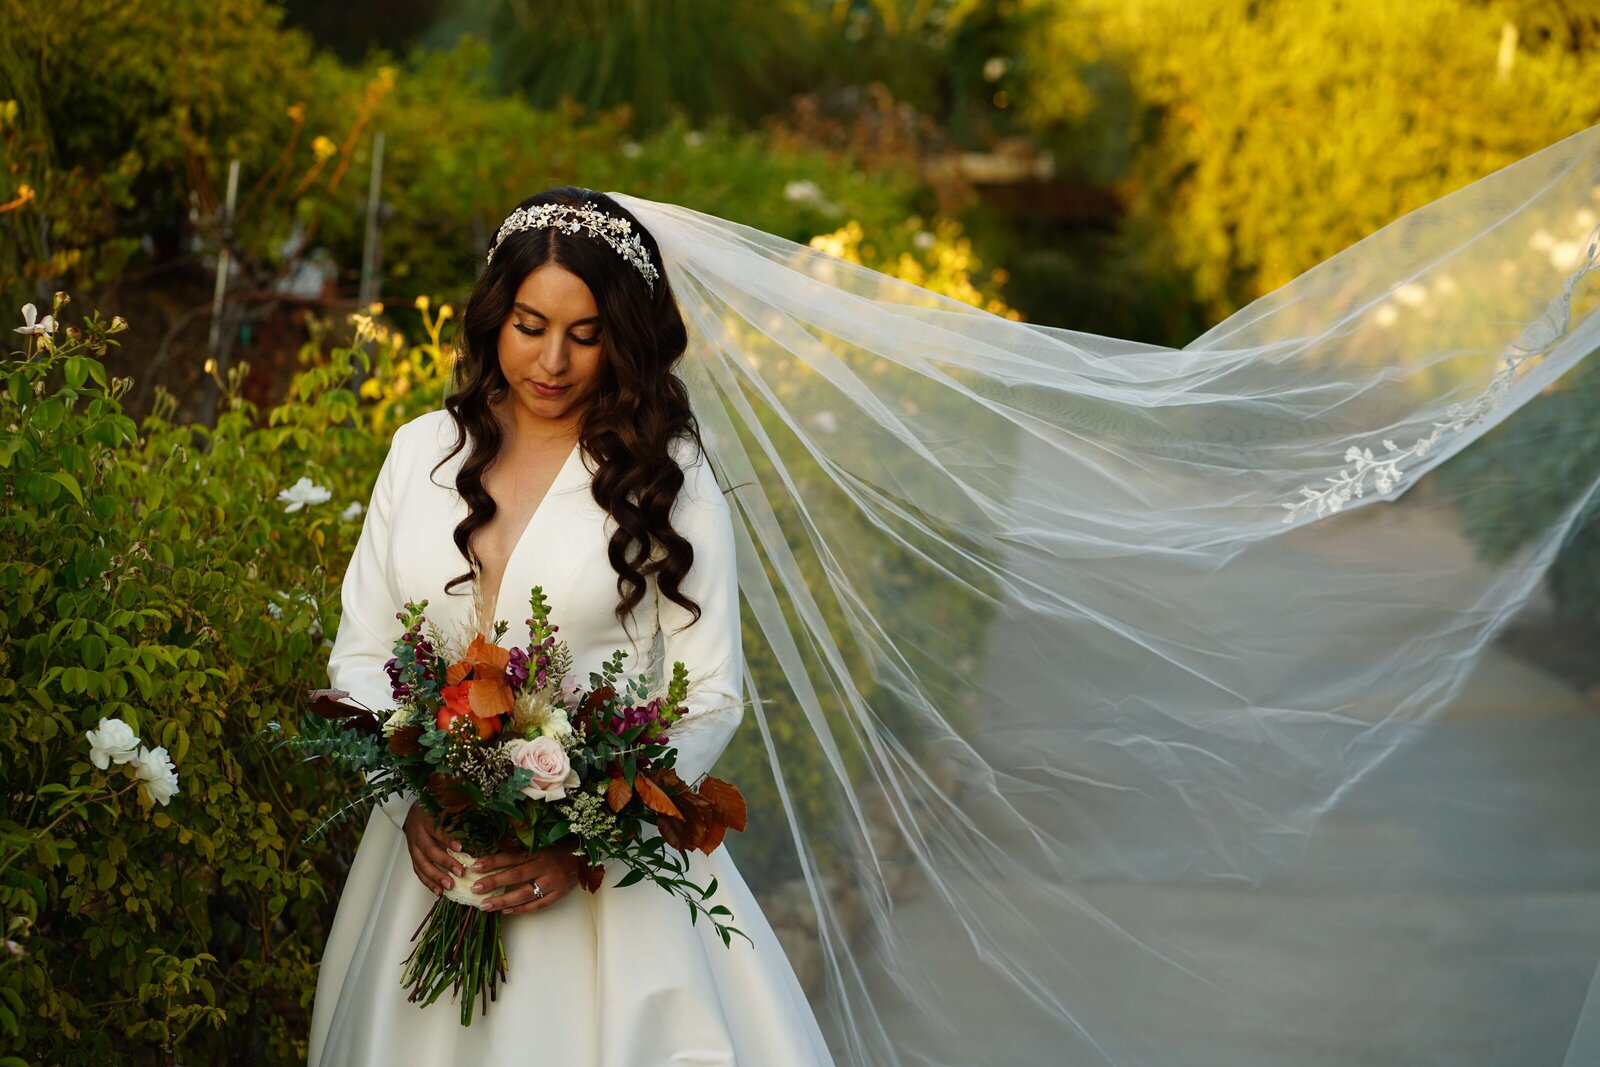 Weddings and Family Portraits in Orange County bride holding floral bouquet and veil blowing in the wind